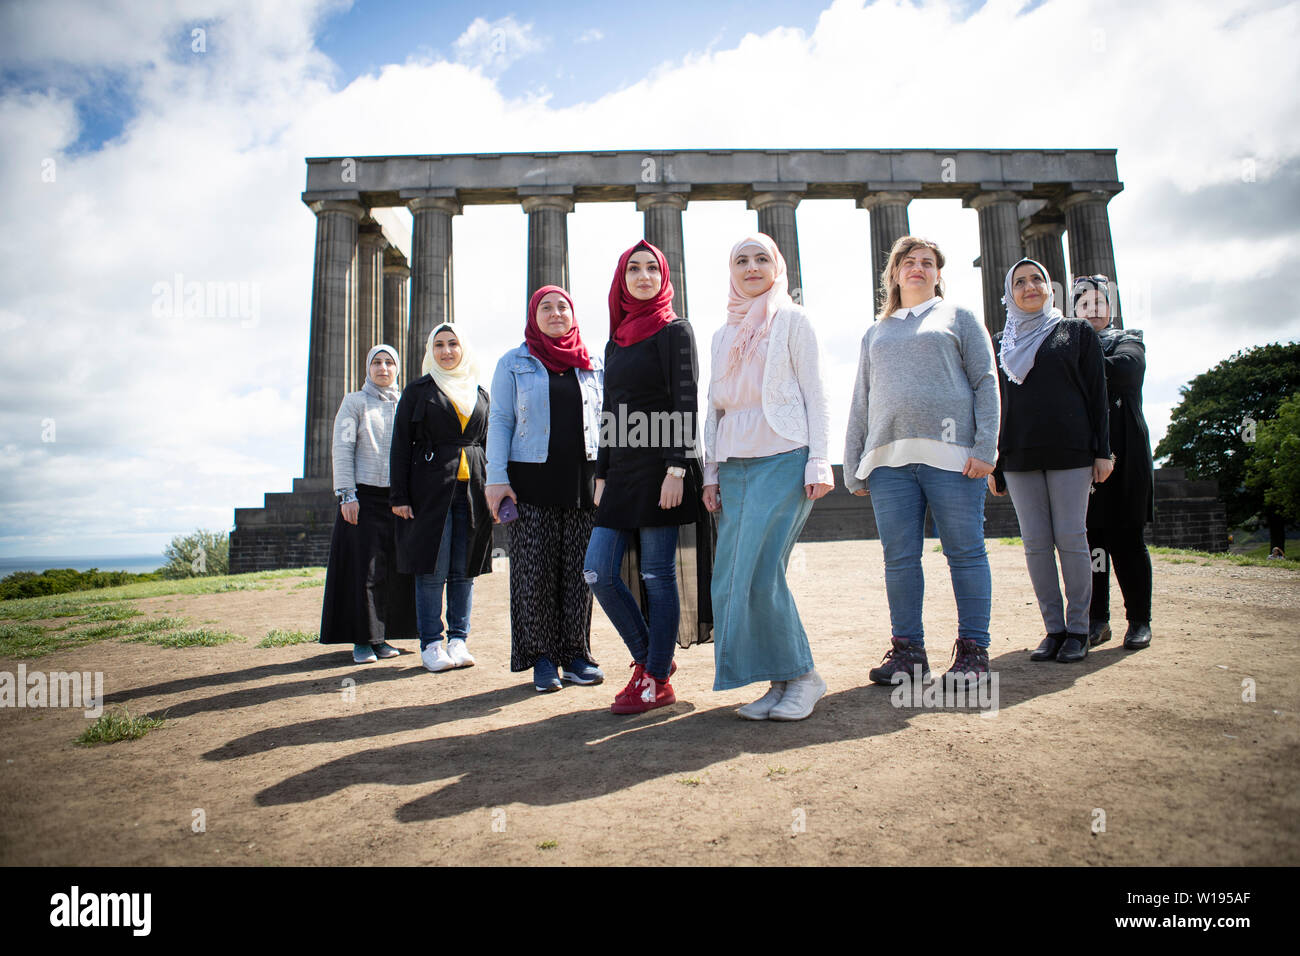 Syrian refugees, living in Glasgow, during a photocall, on Edinburgh's Calton Hill, for a theatrical adaptation of Euripides' The Trojan Women which they have written and hope to perform at this year's Edinburgh Festival. Stock Photo